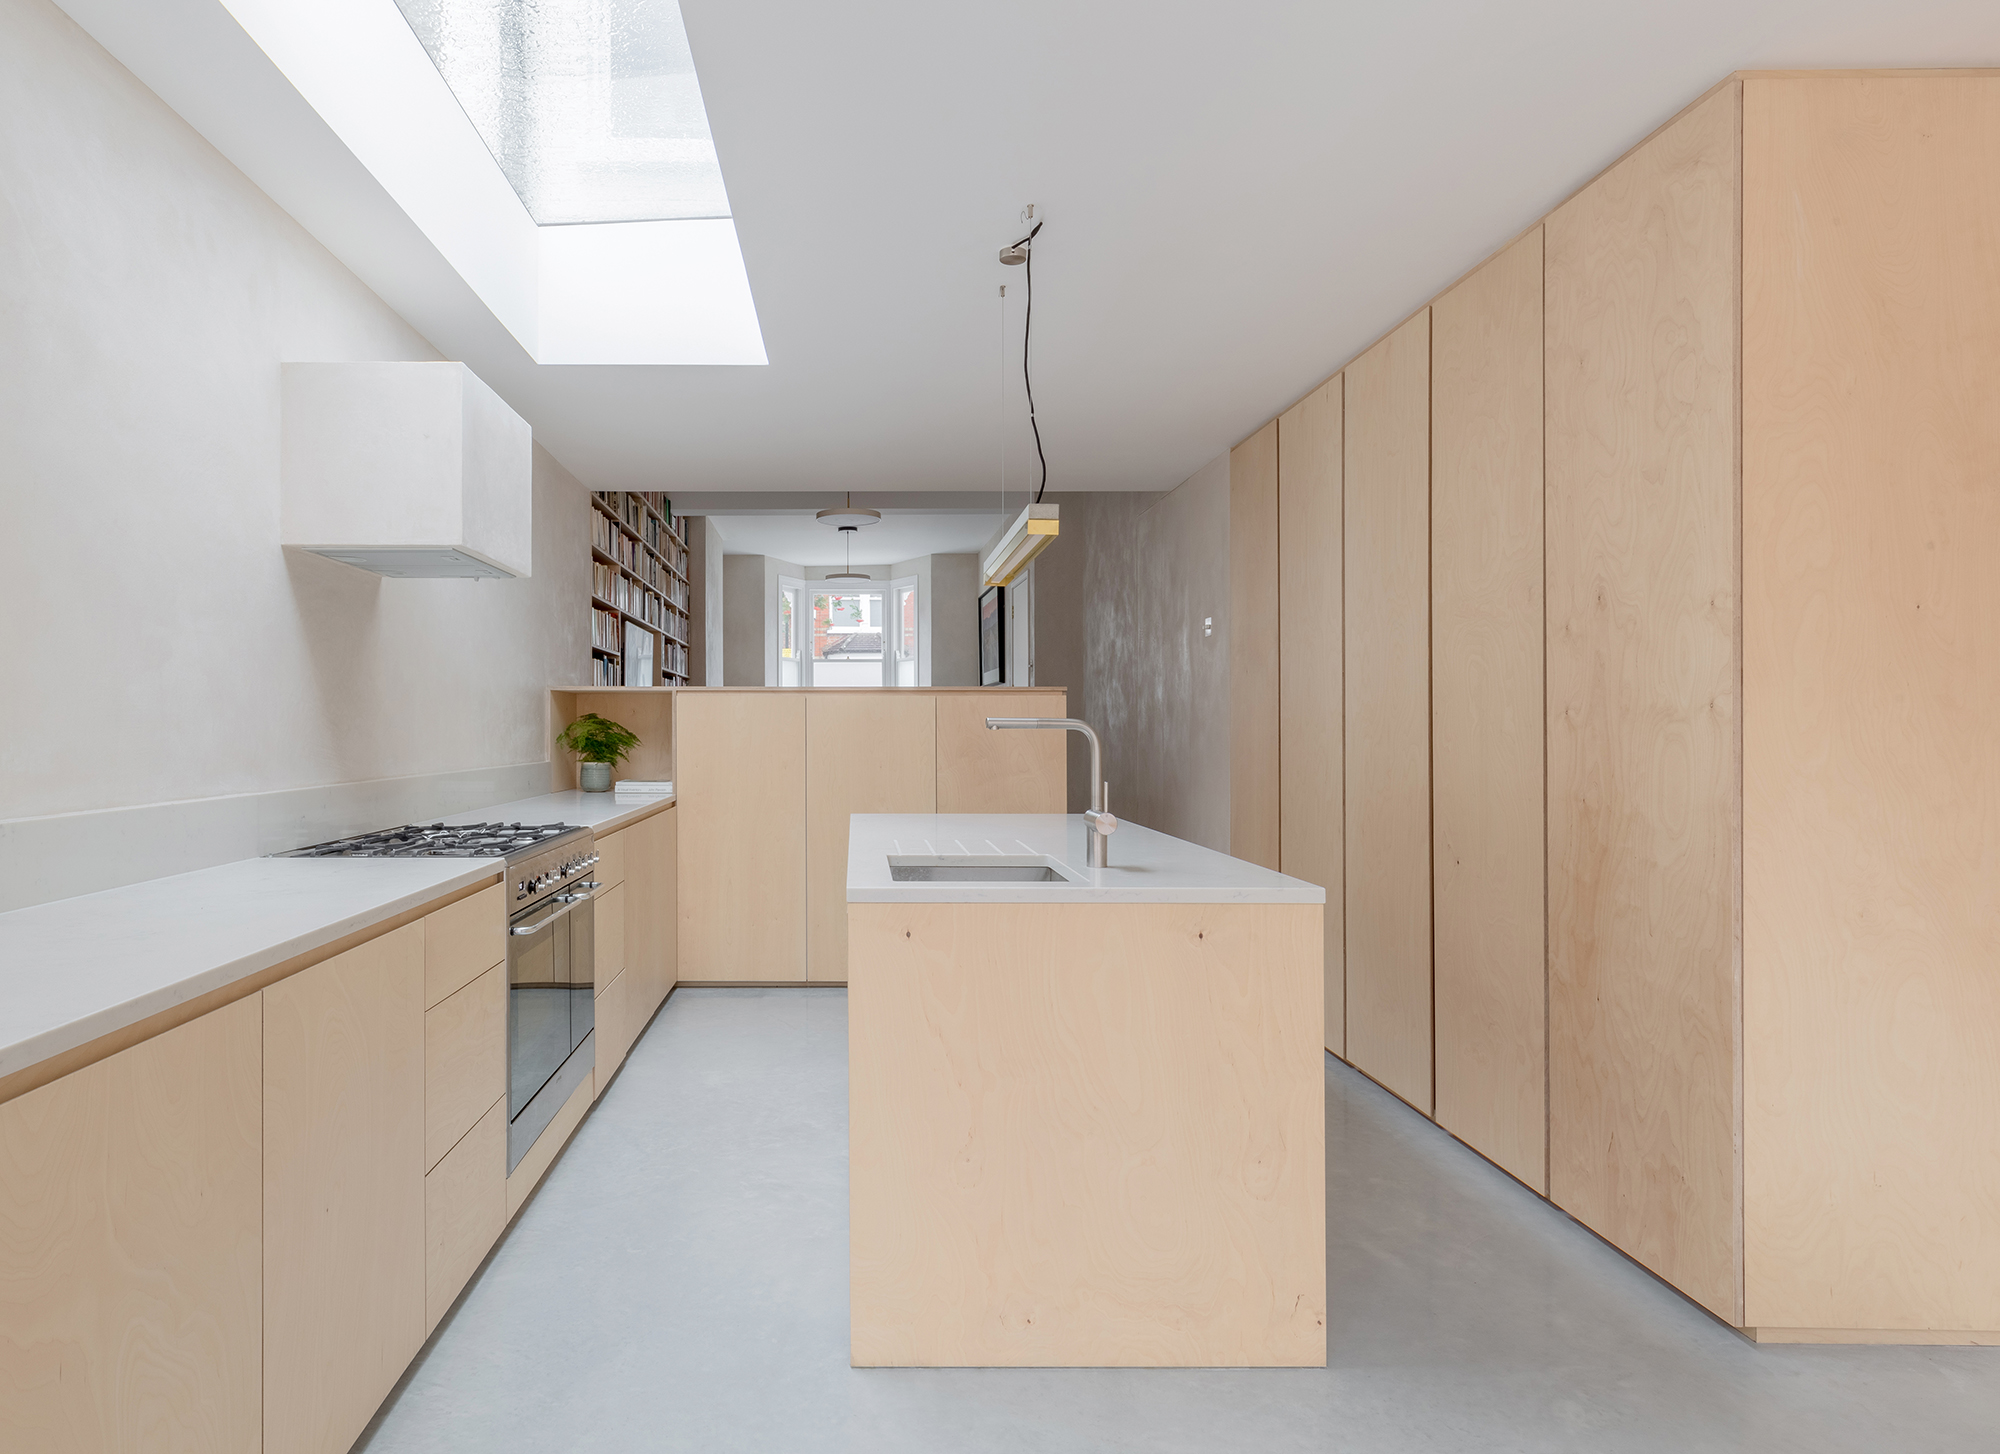 </p> <p>Find your ideal home design pro on designfor-me.com - get matched and see who's interested in your home project. Click image to see more inspiration from our design pros</p> <p>Design by Alice, architect from Waltham Forest, London</p> <p>#architecture #homedesign #modernhomes #homeinspiration #kitchens #kitchendesign #kitcheninspiration #kitchenideas #kitchengoals #scandihome #scandidecor #scandinaviandesign #skylights #rooflights </p> <p>